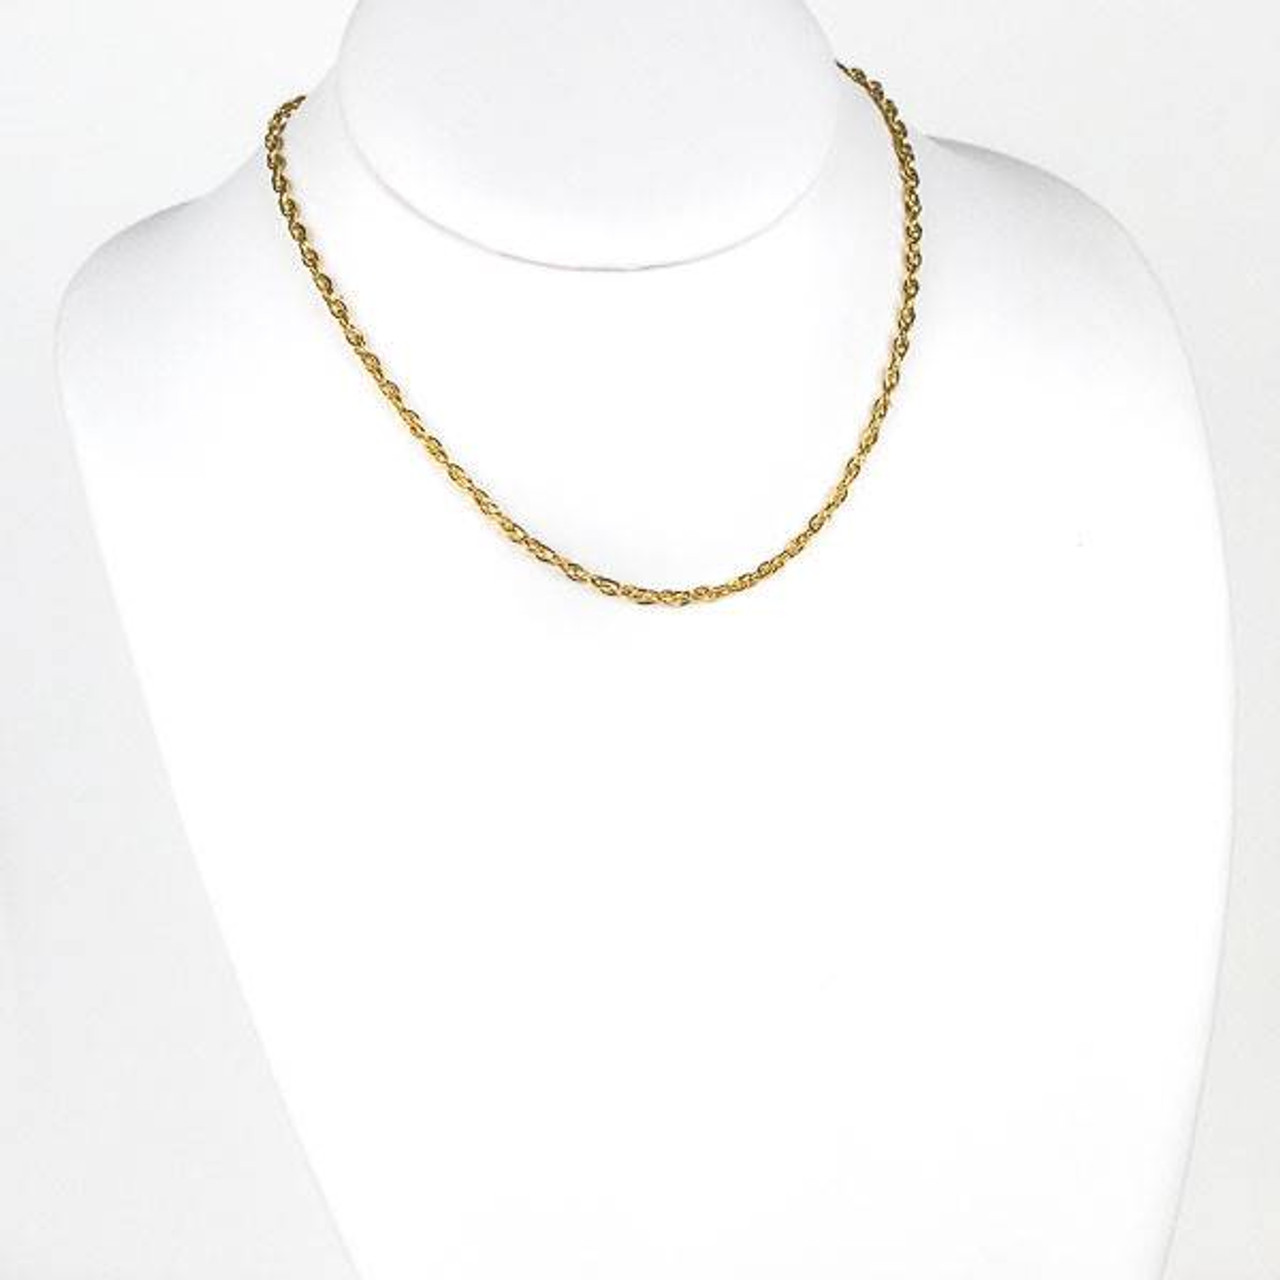 3mm Tube Link Chain 14k Gold Filled Inch